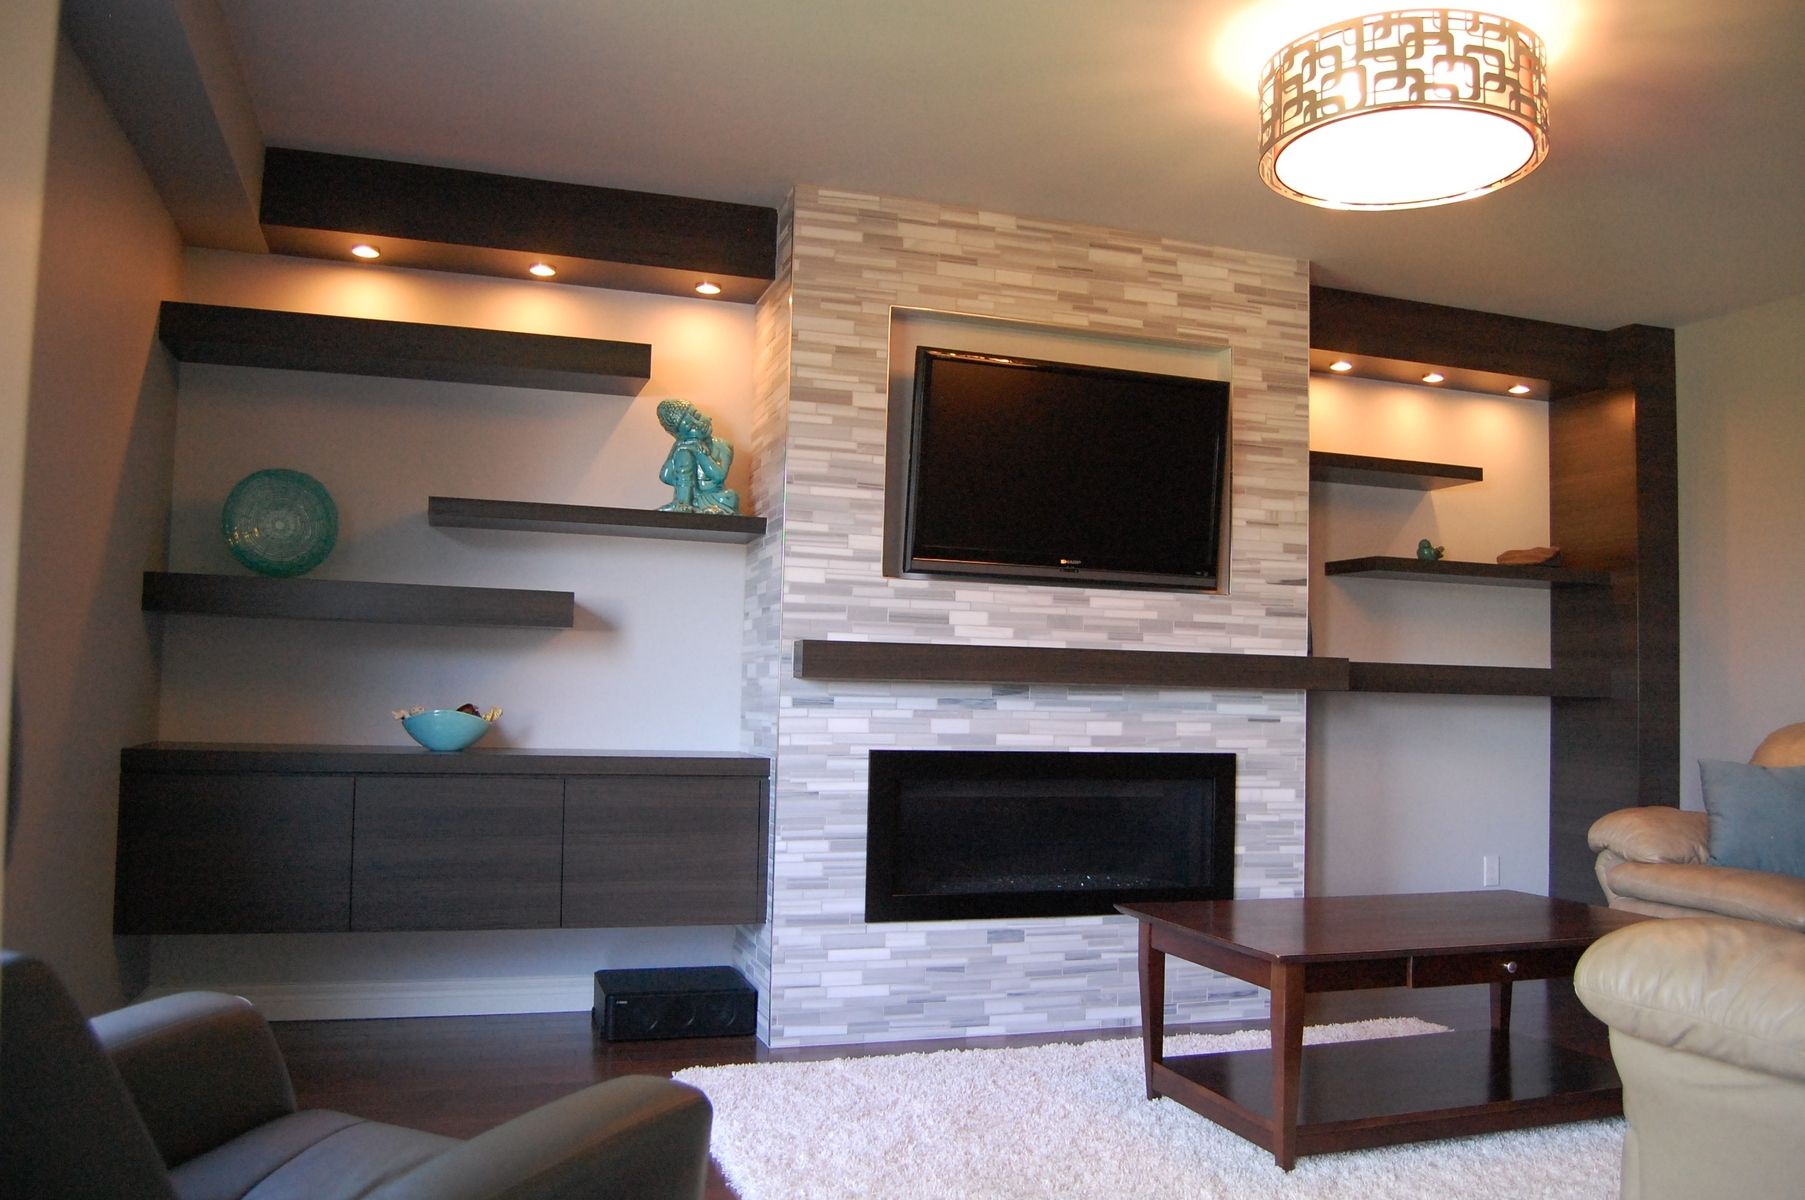 Fireplace Console Table Beautiful Custom Modern Wall Unit Made Pletely From A Printed